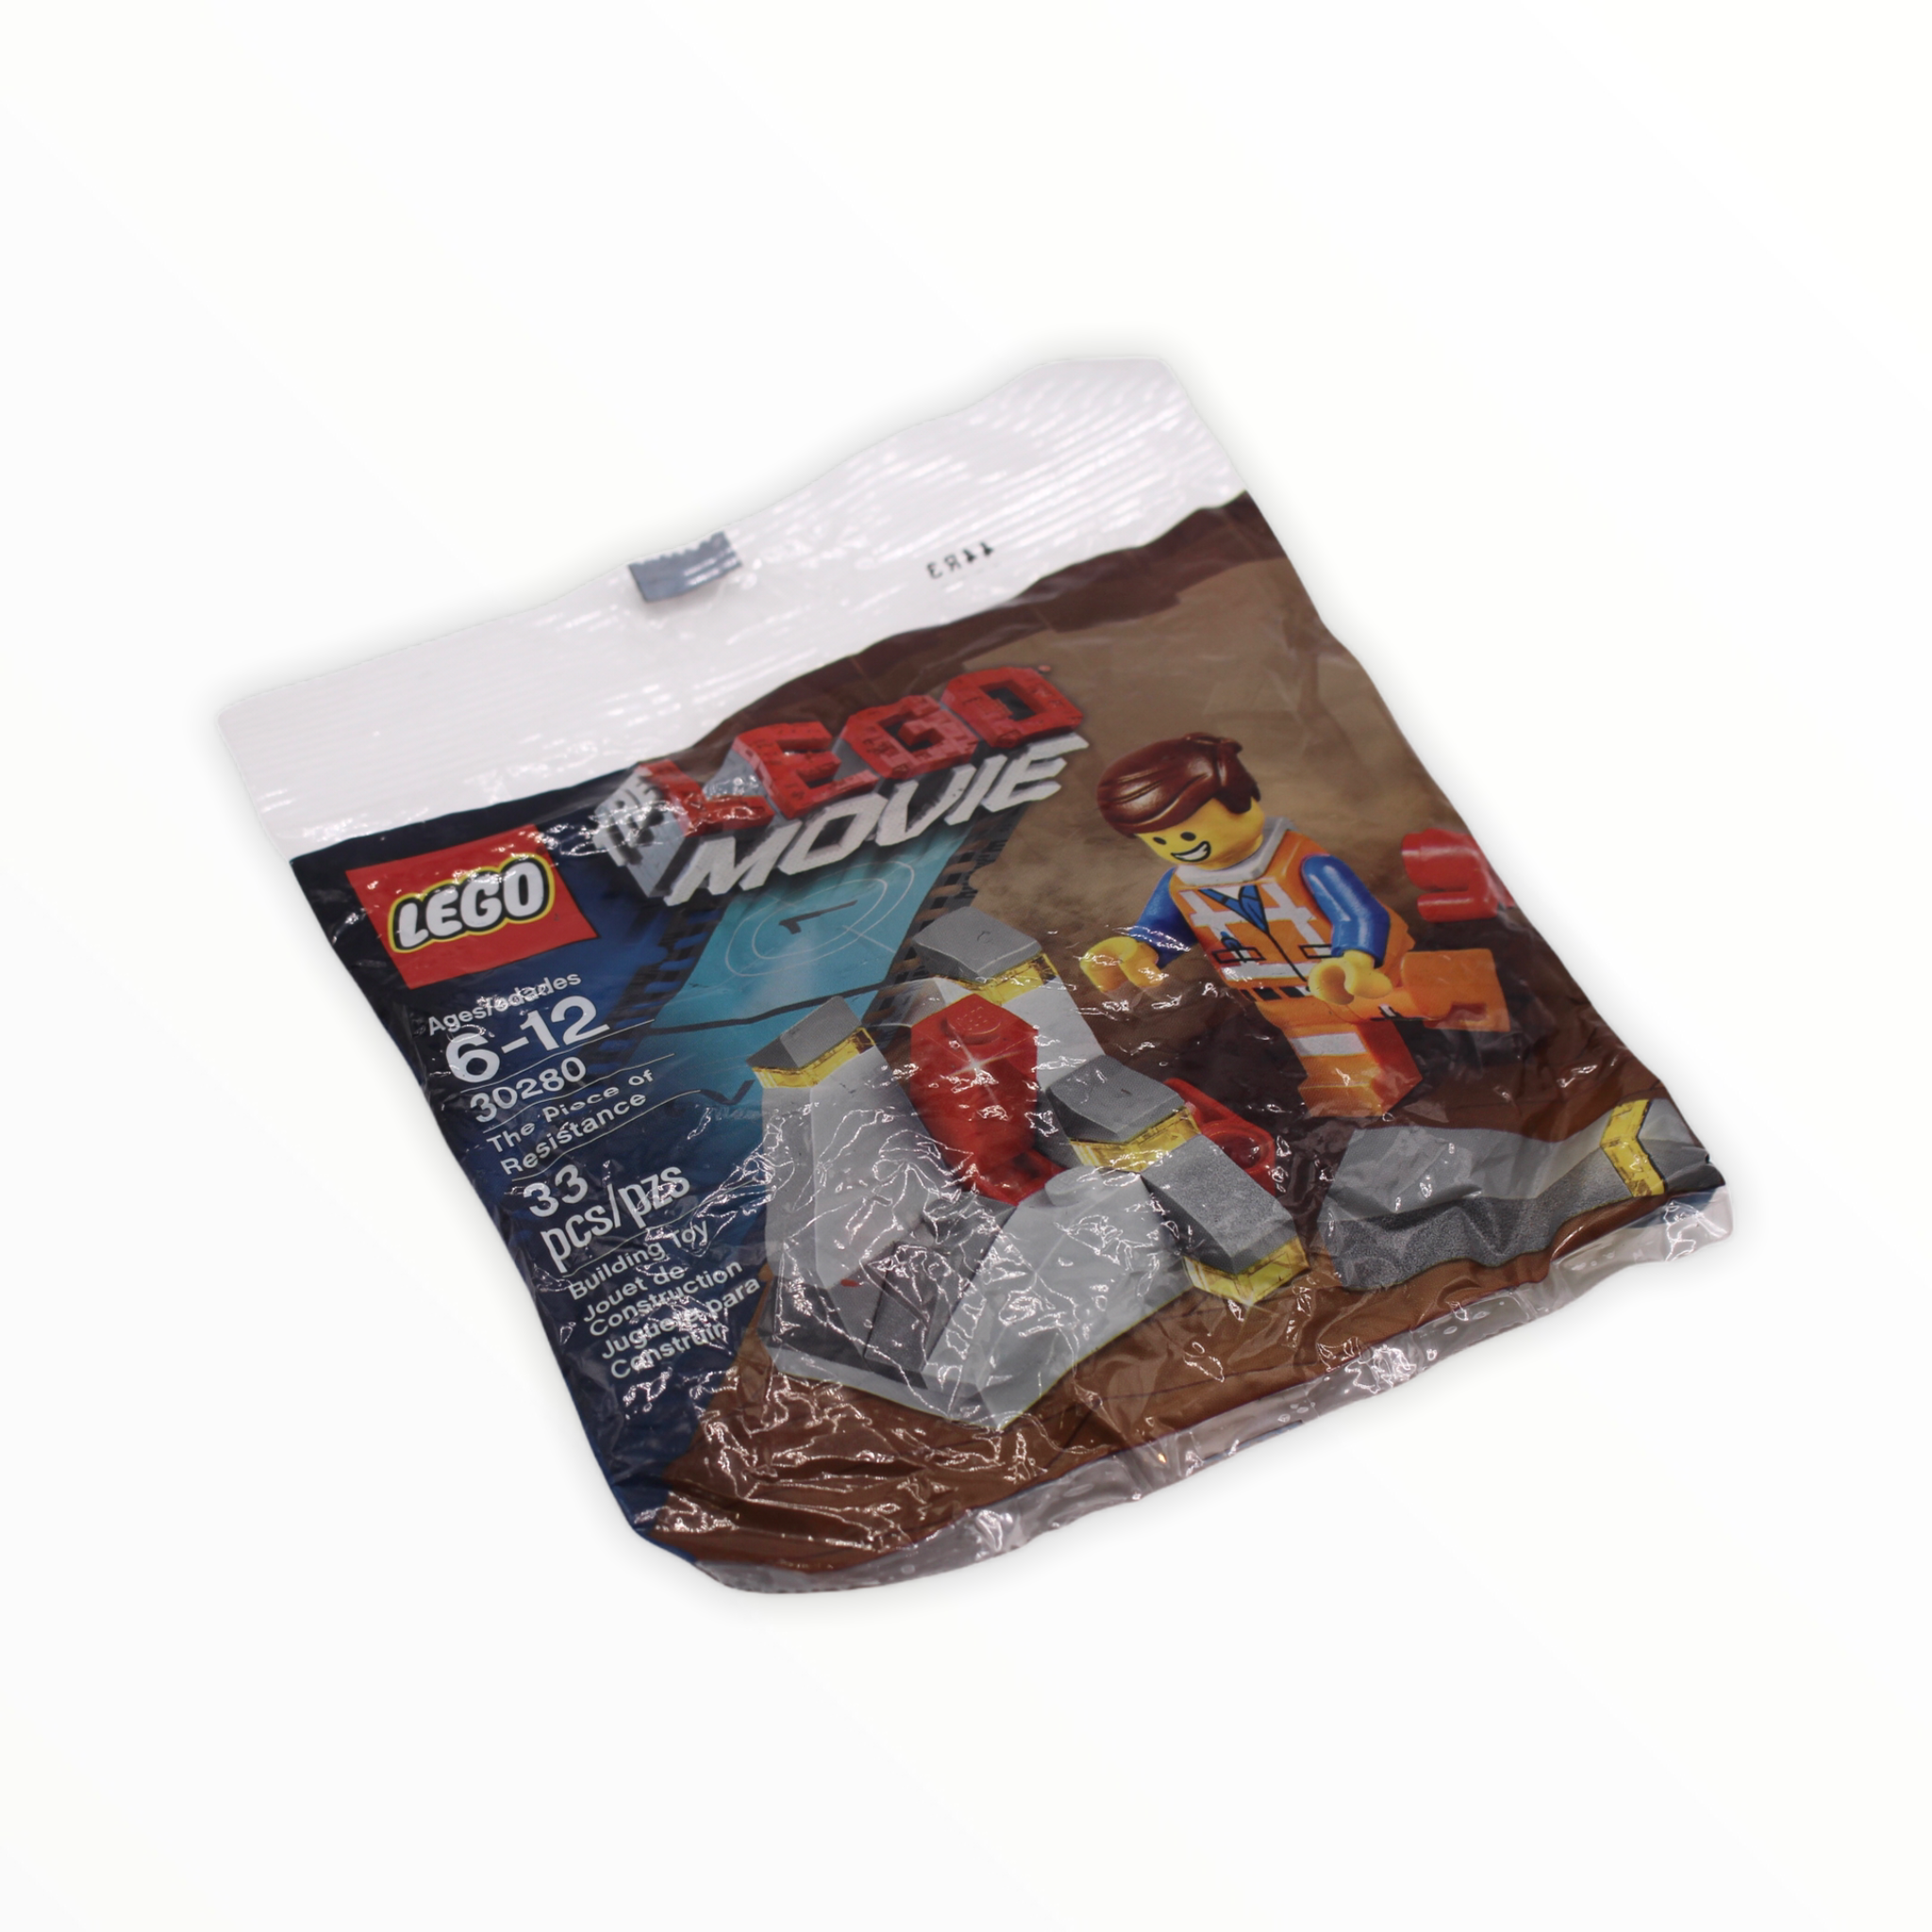 Polybag 30280 The LEGO Movie The Piece of Resistance